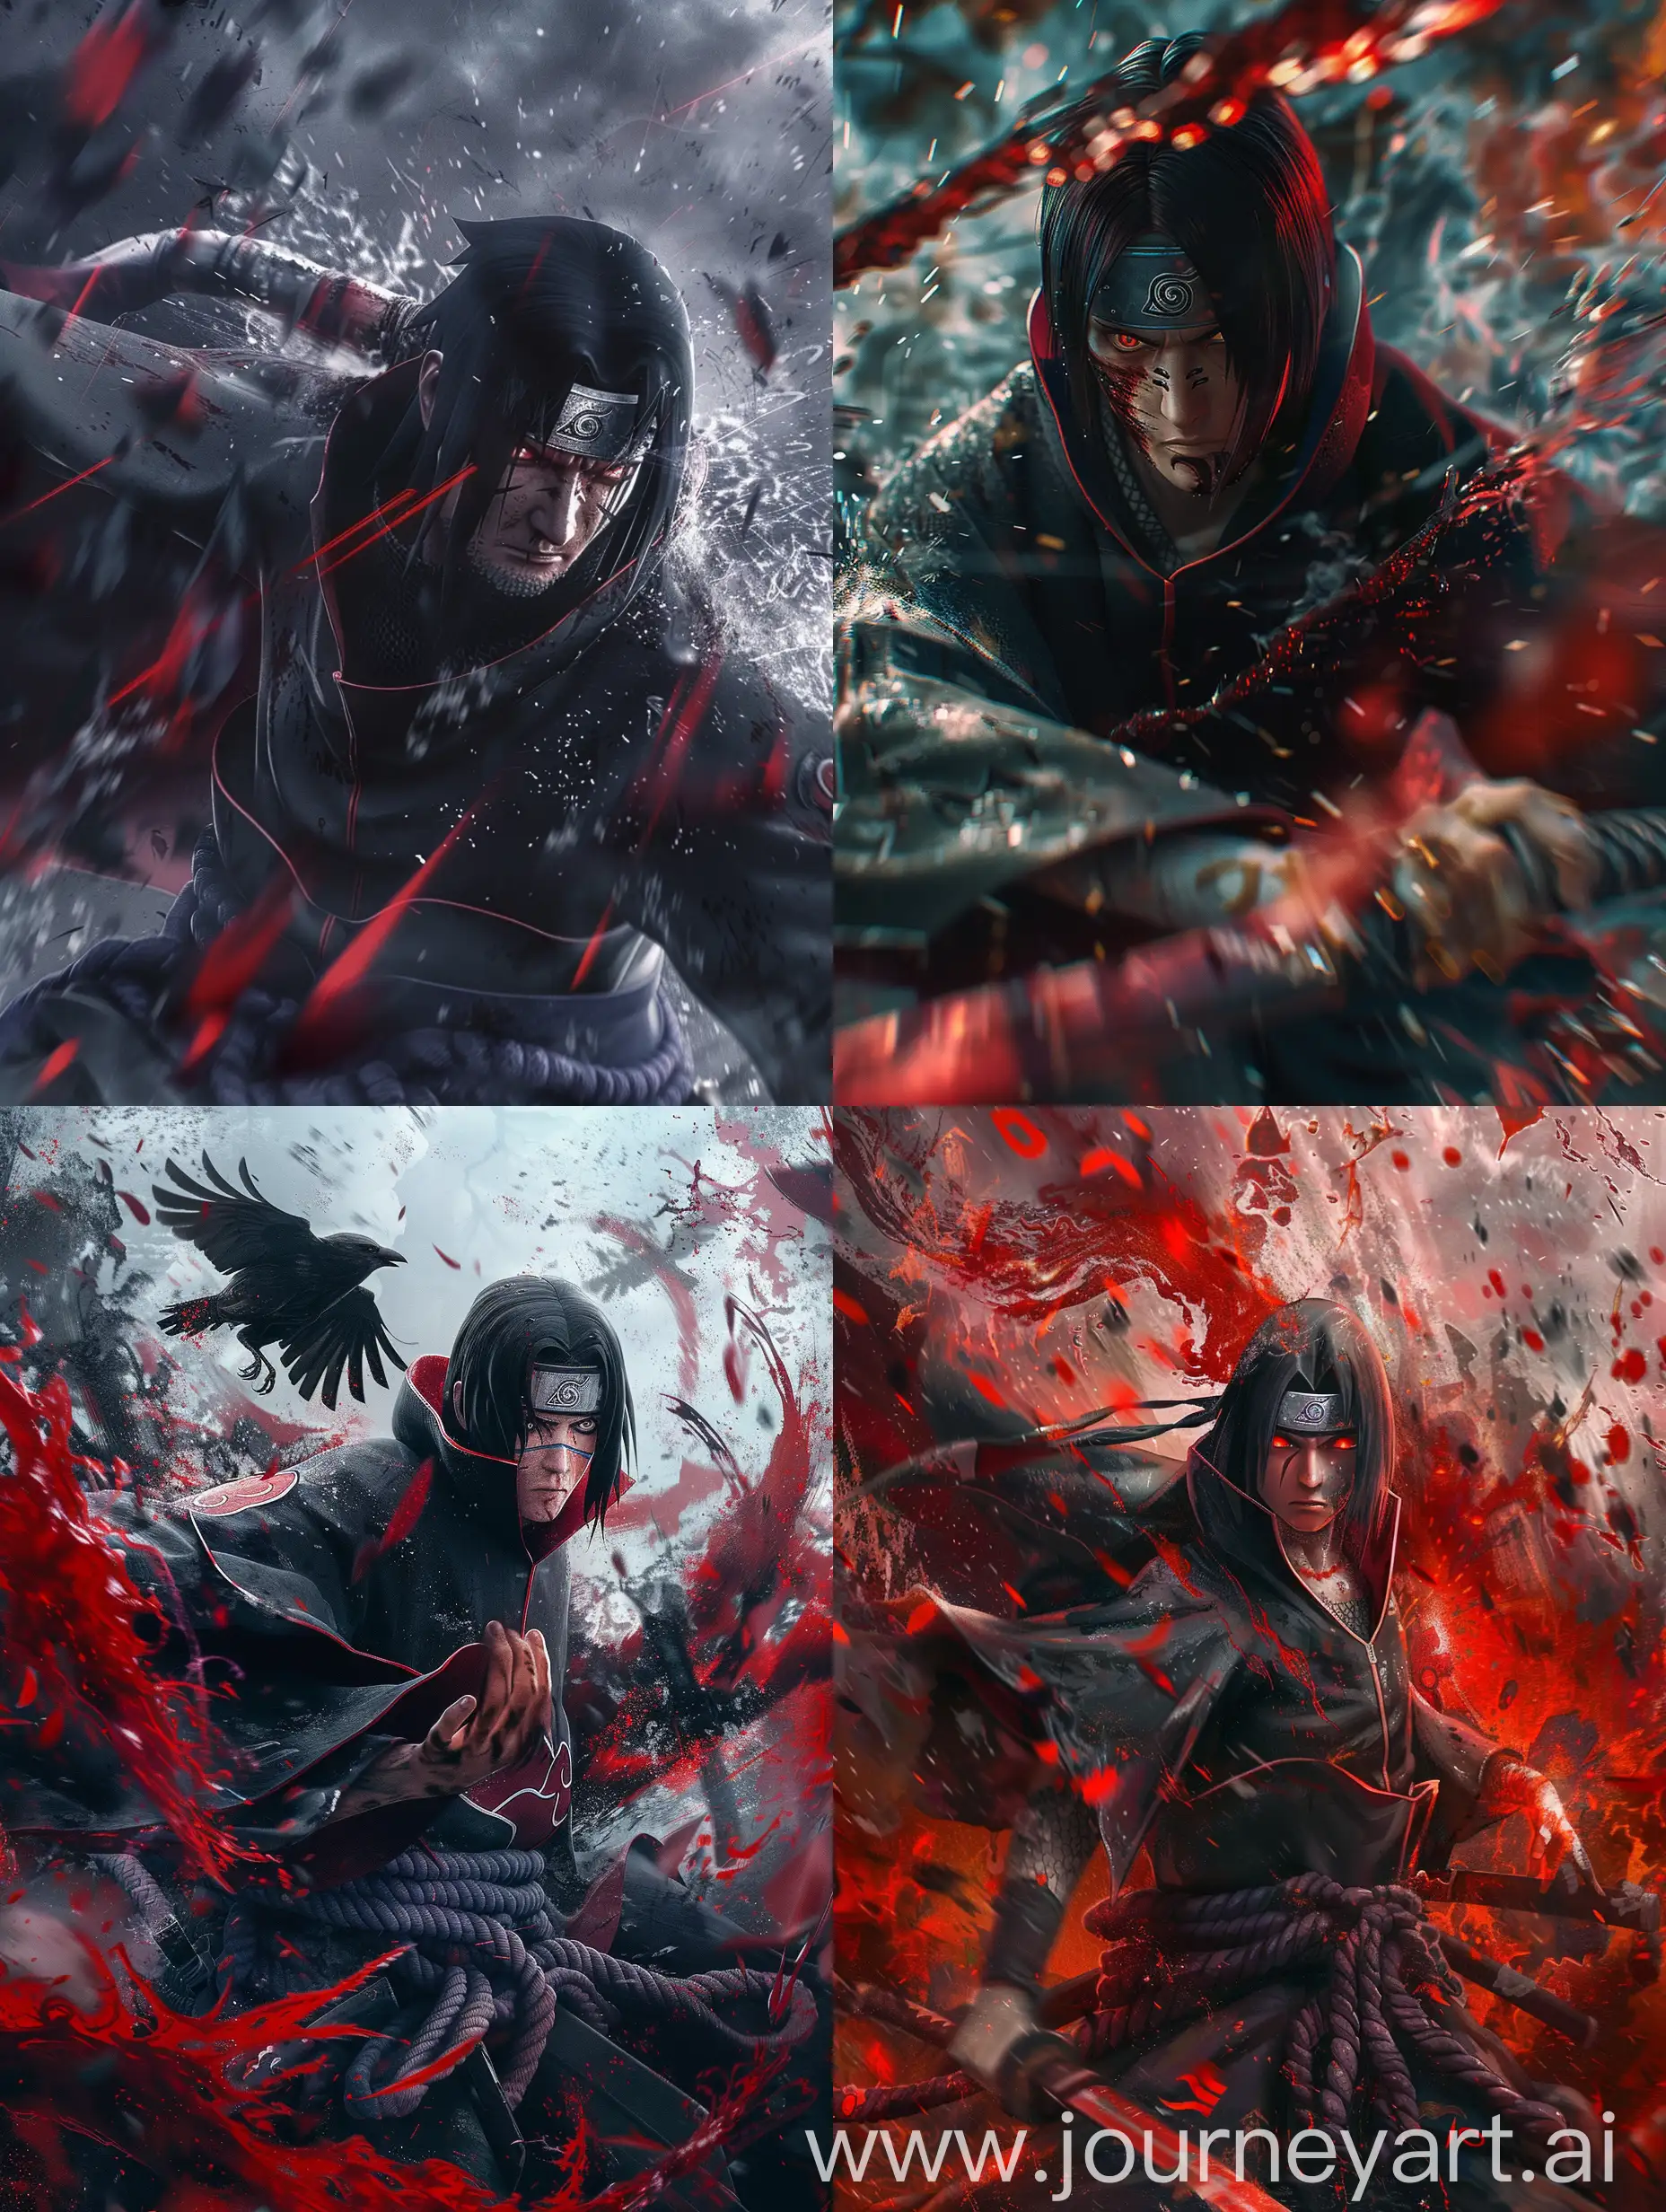 Hyper realistic image of itachi uchiha in action ,dynamic background can be a emerging knight,mokoto shinkai style with hyper realism mix